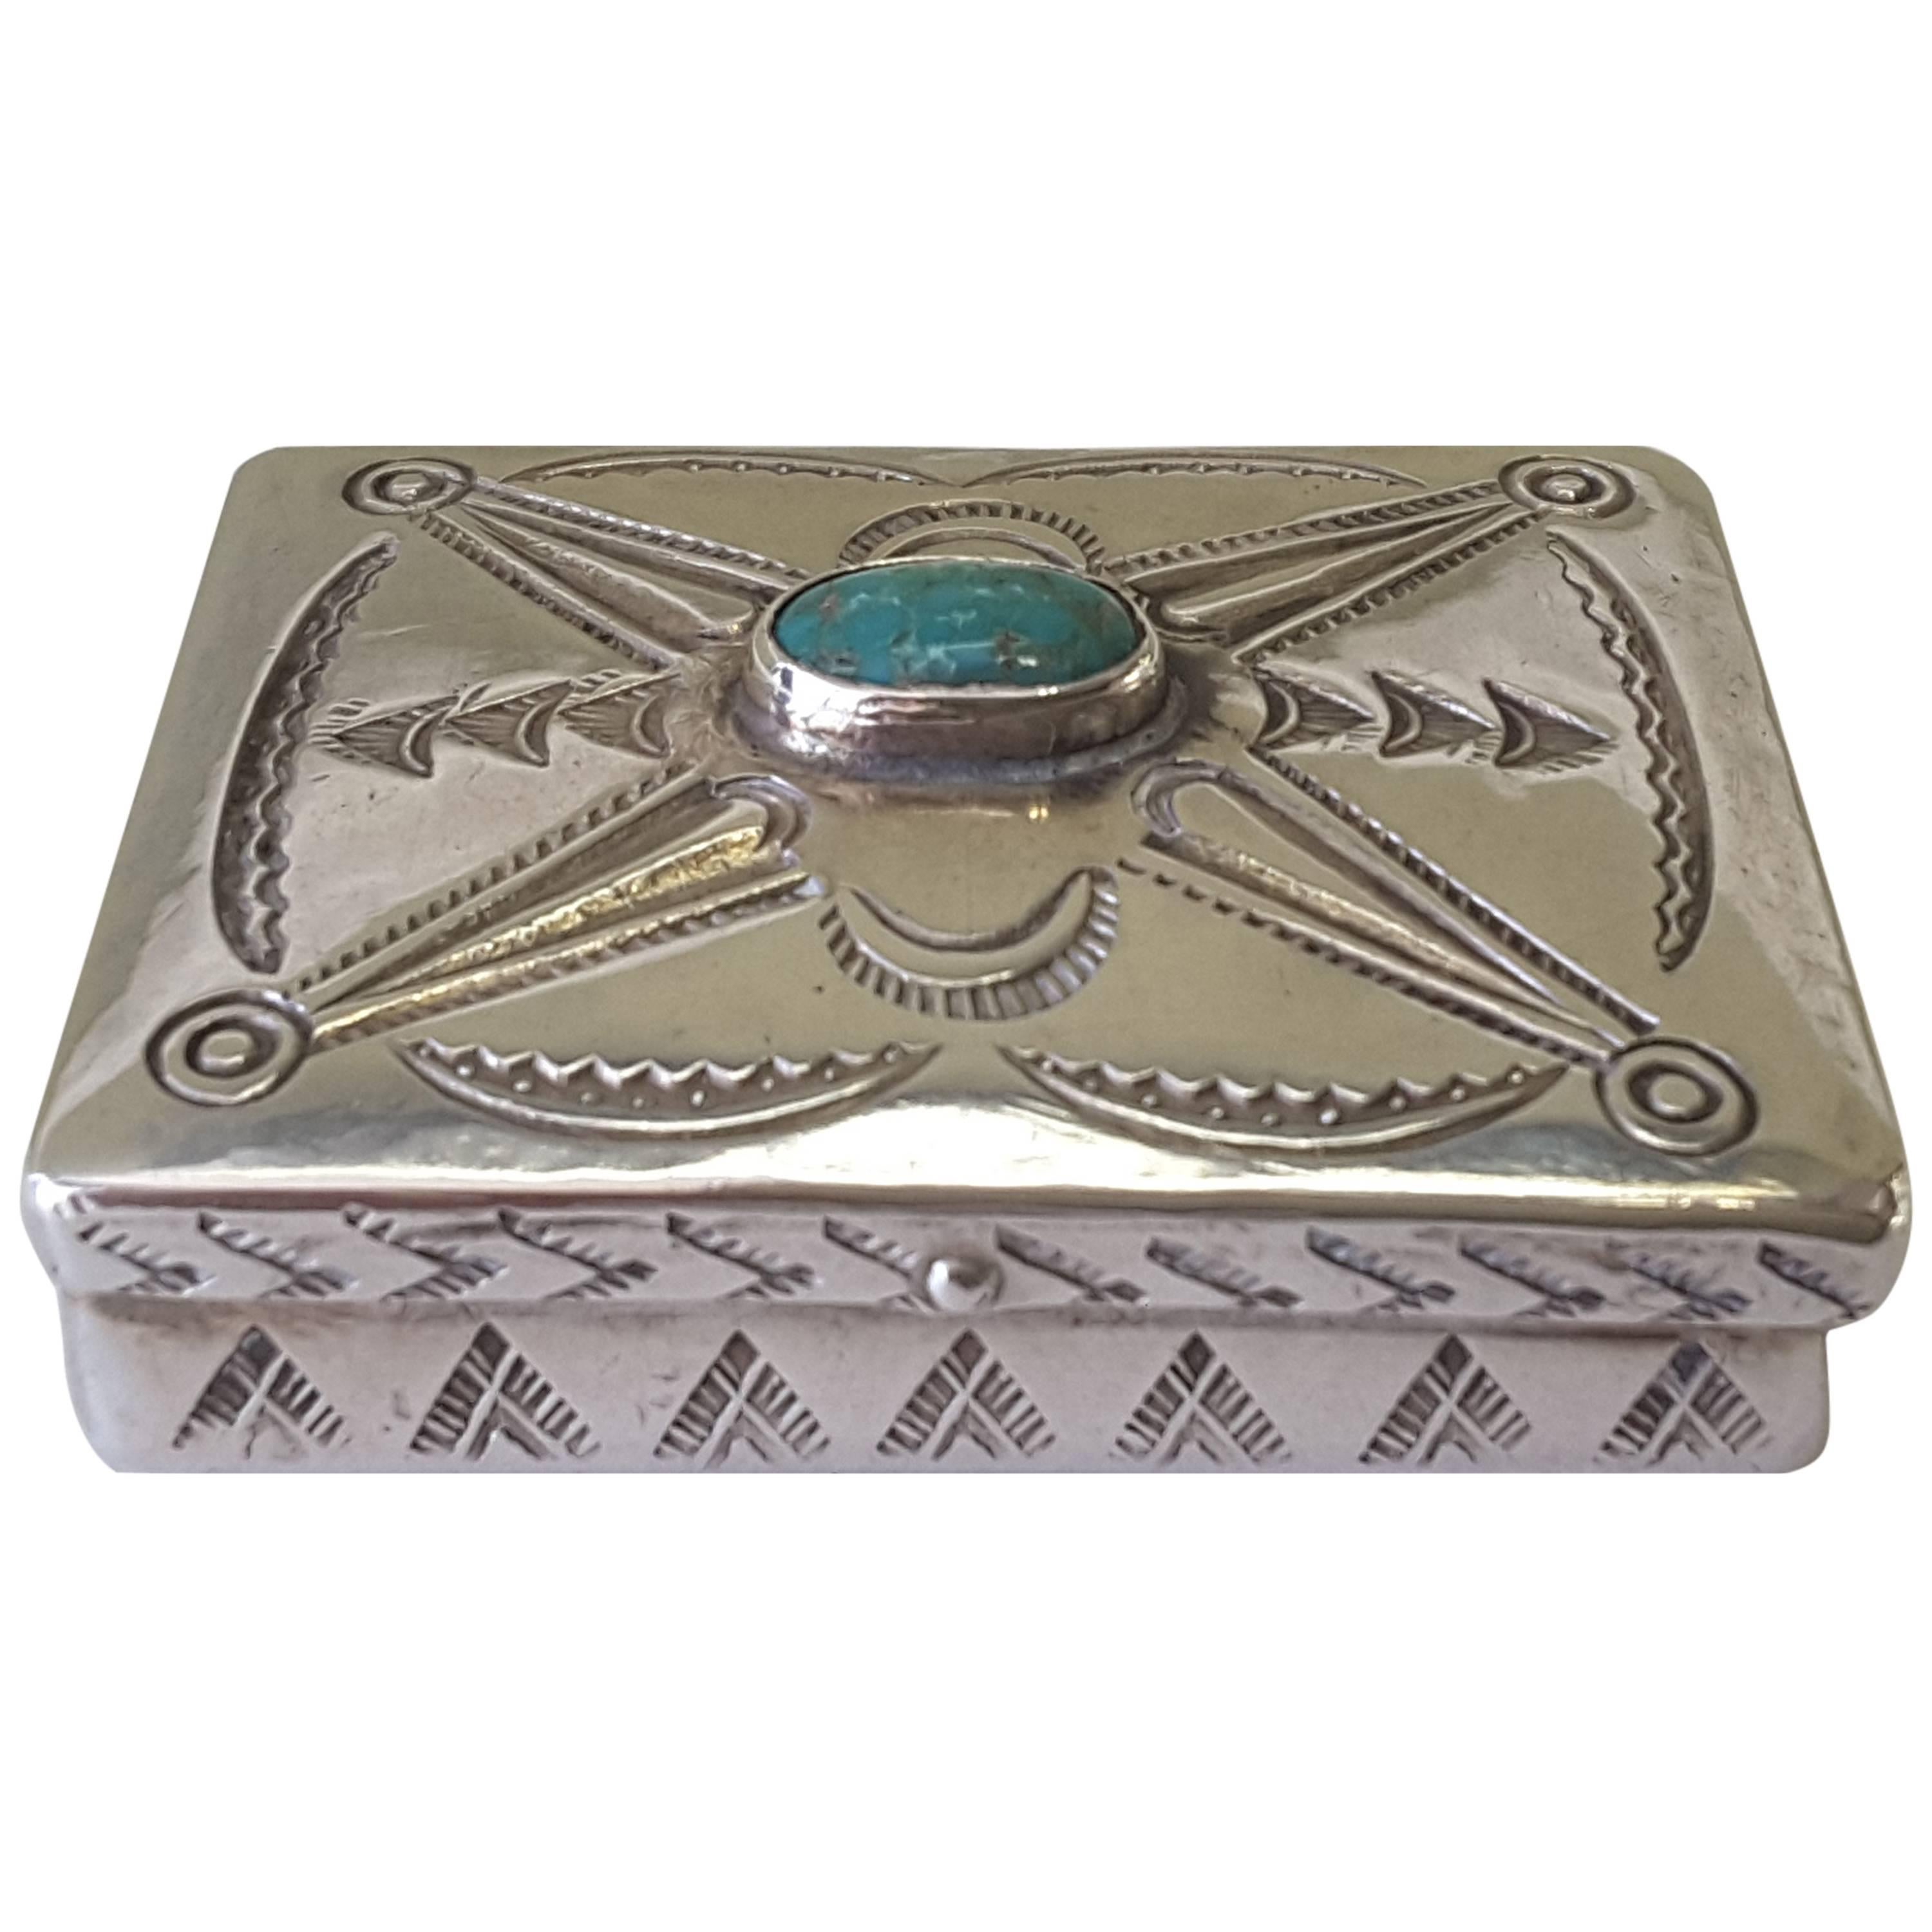 Miniature .925 Silver and Turquoise Navajo Trinket Box, Typical Navajo  Design